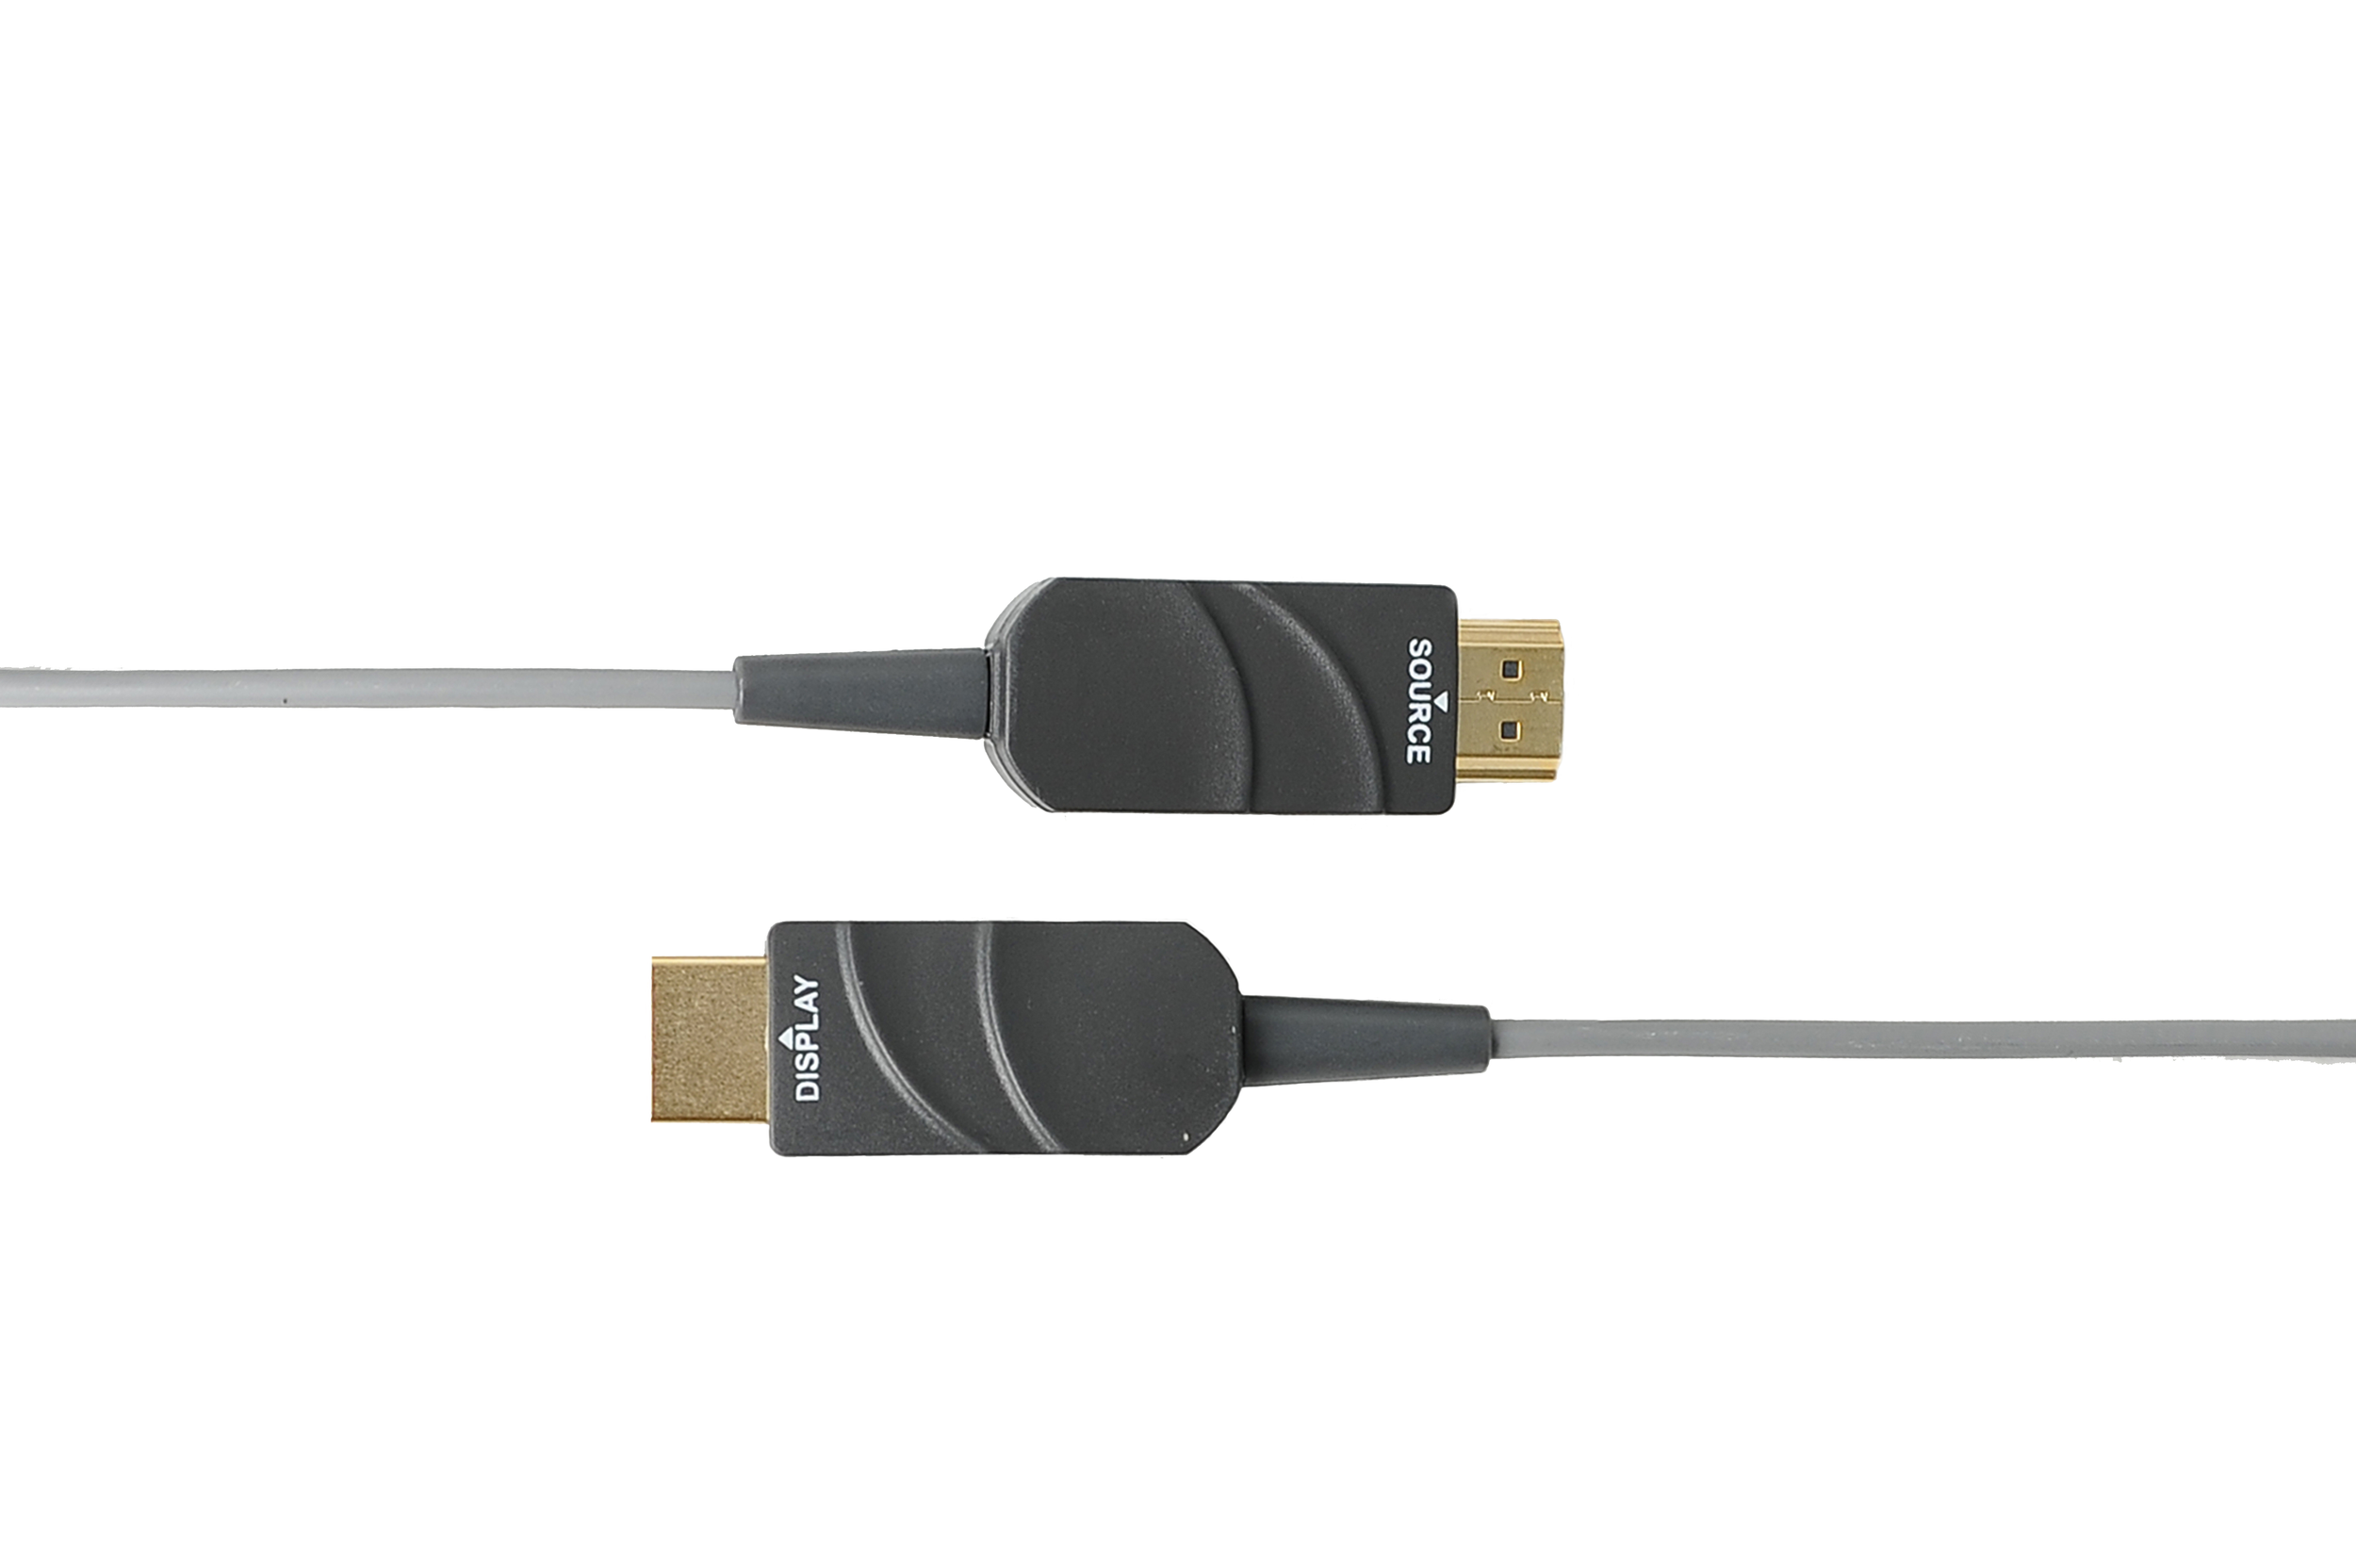 LMH2-N; HDMI 2.0 Active Optical Cable